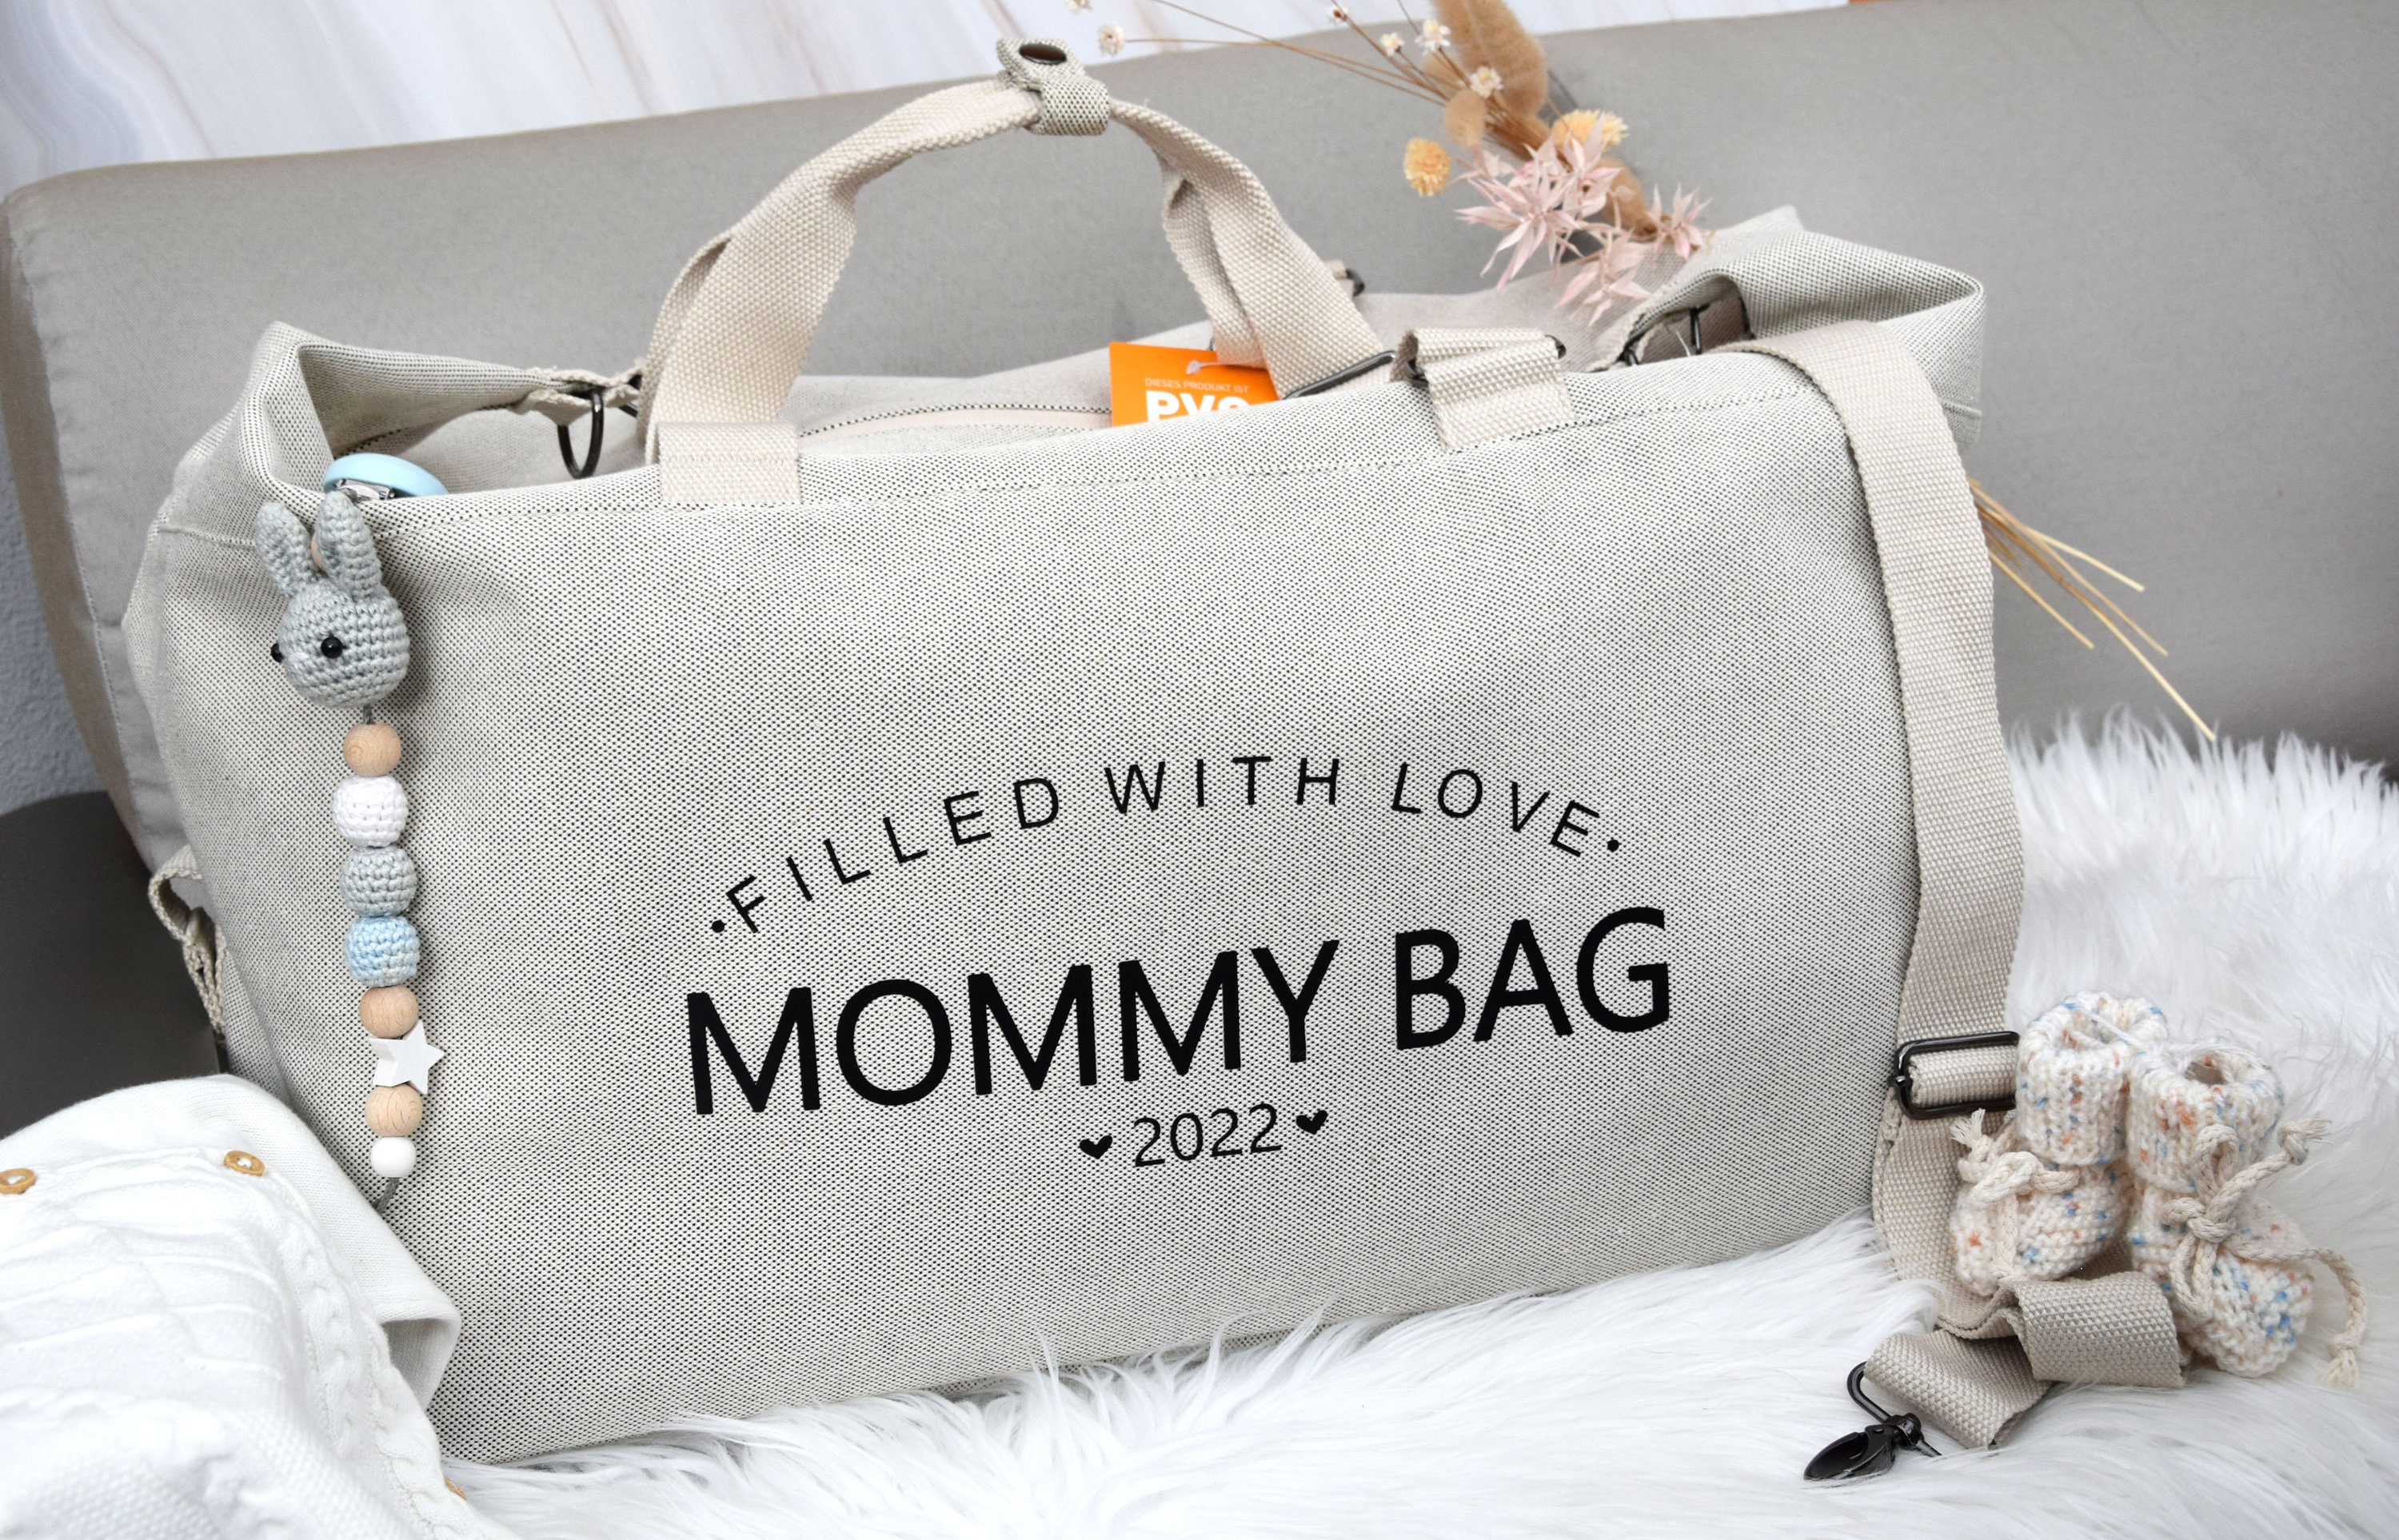 printe Diaper Bag Tote, Mommy Bag for Hospital, Large Capacity Waterproof  Baby Bag for Mom Travel, Hospital Bag for Labor and Delivery with Baby